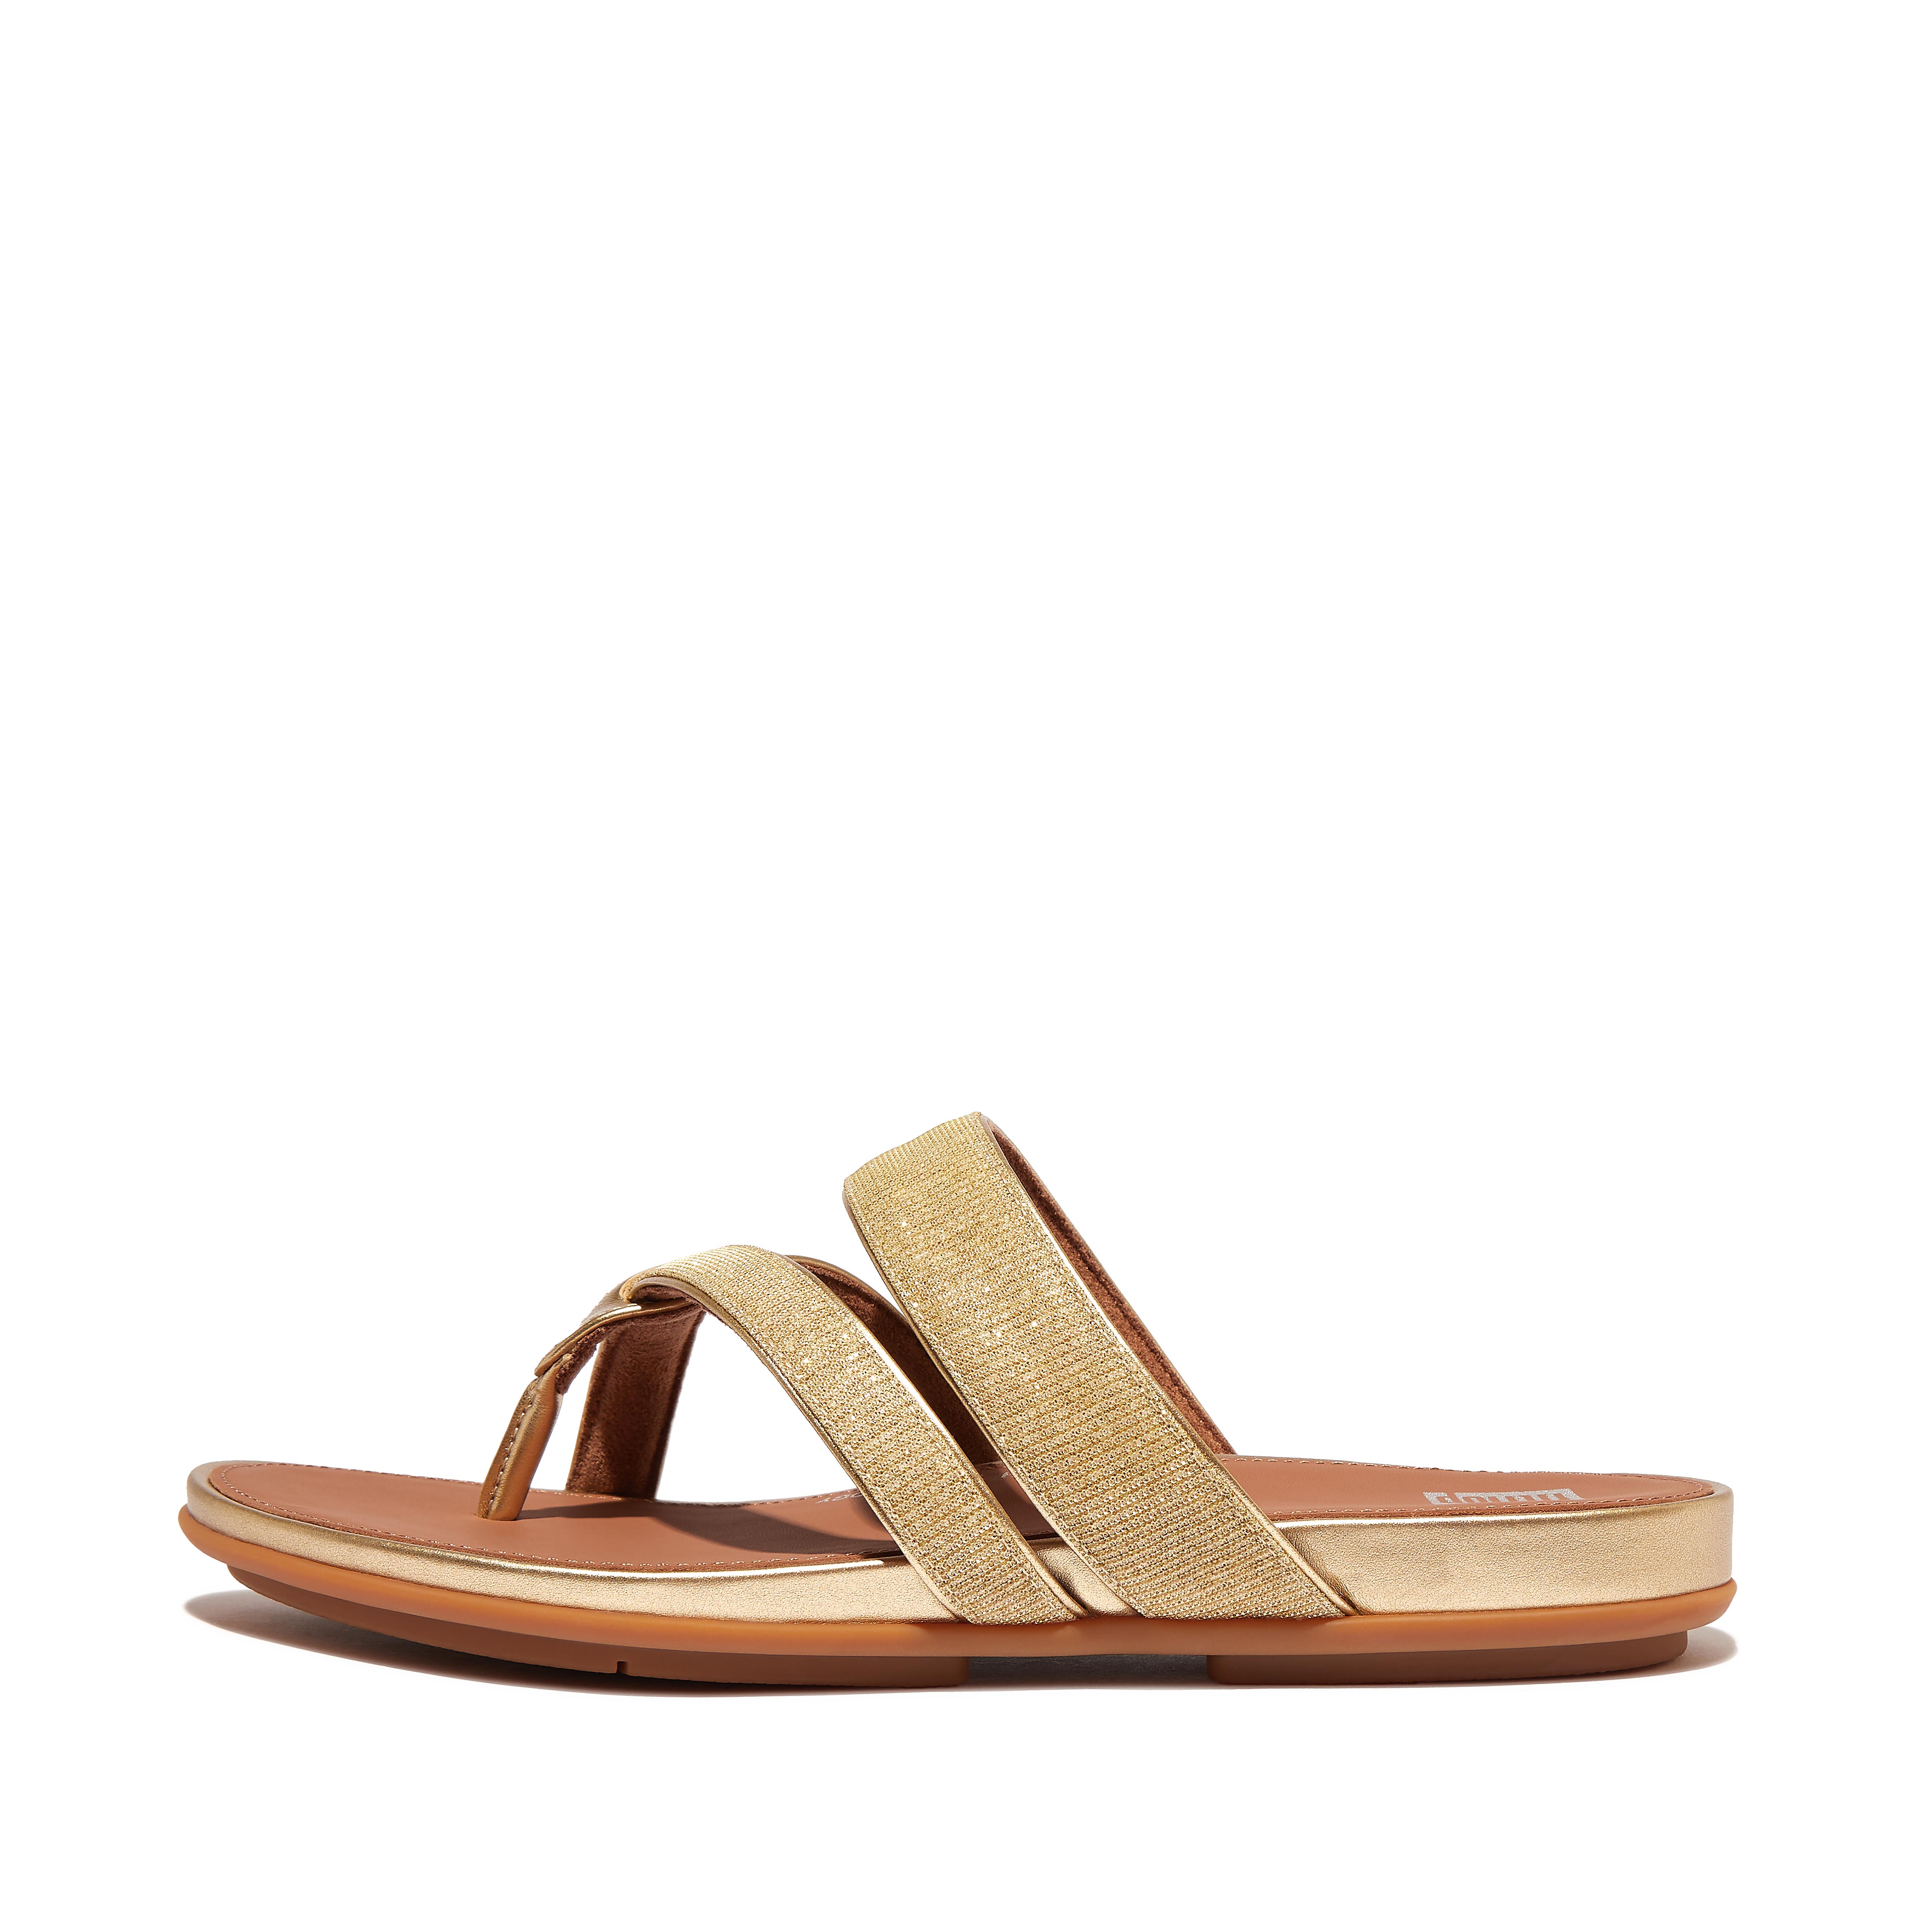 Fitflop Shimmerlux Strappy Toe-Post Sandals,Platino